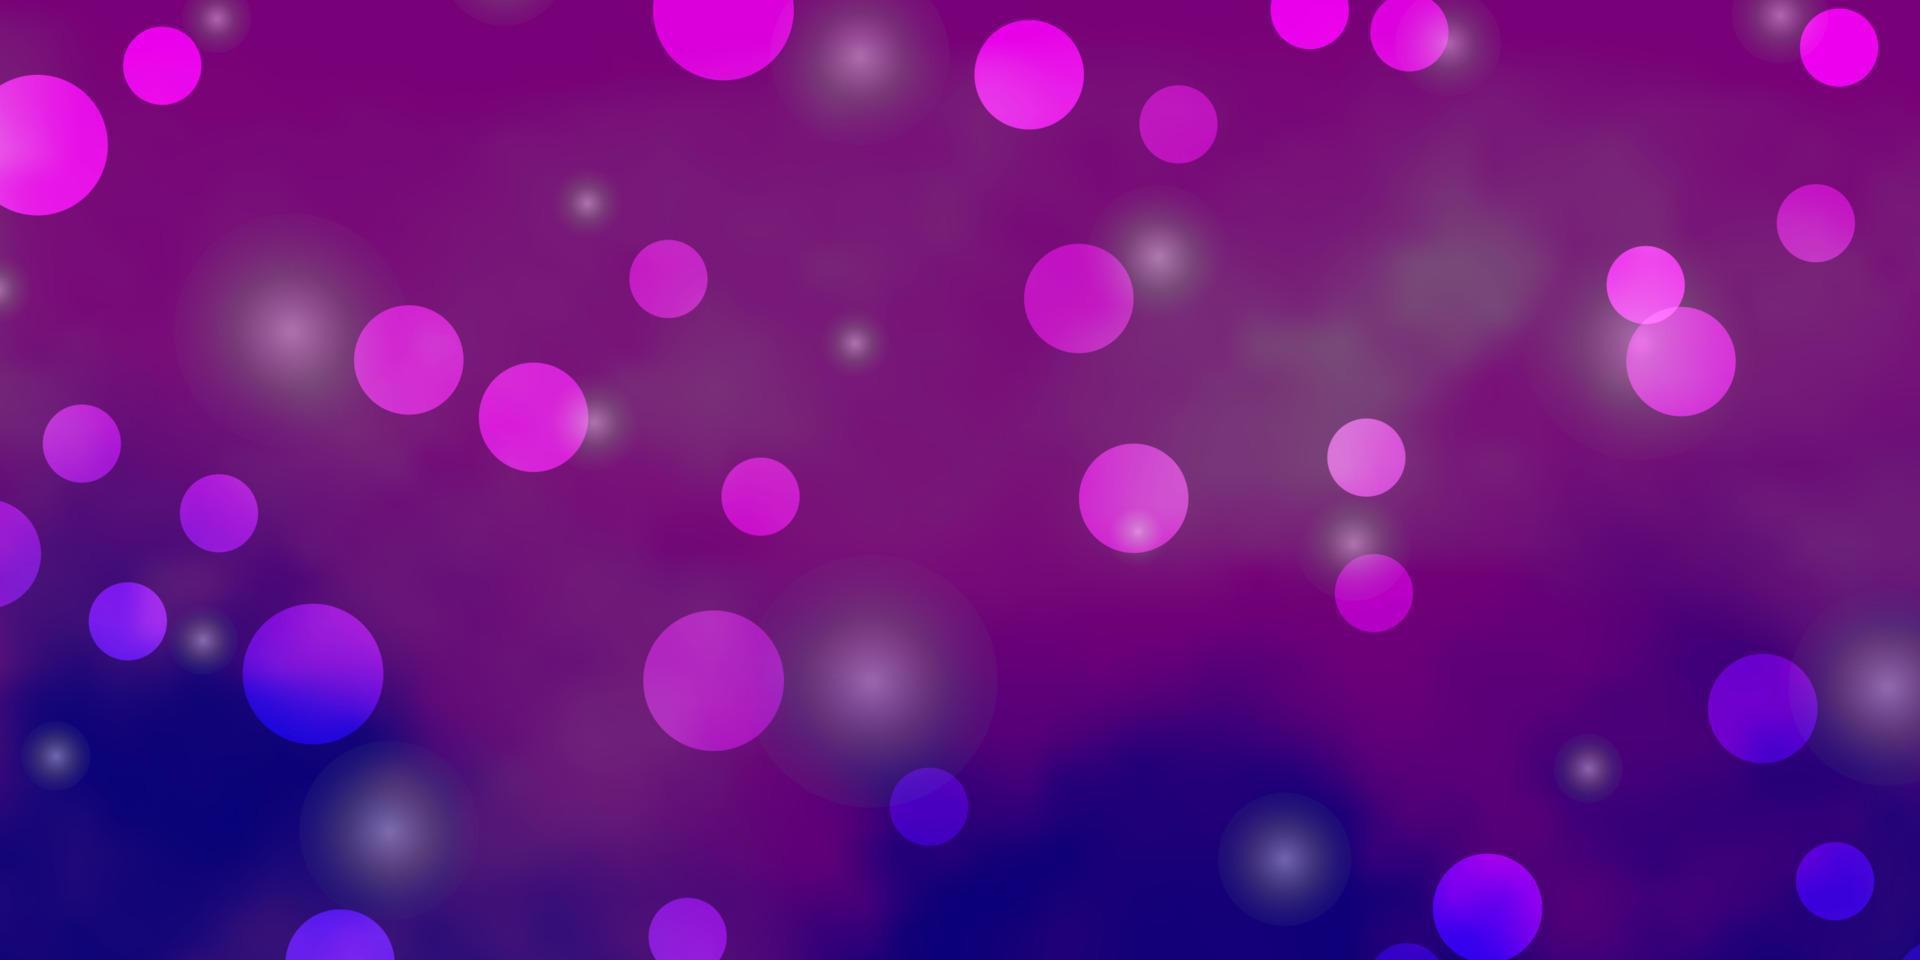 Light Pink, Blue vector pattern with circles, stars.